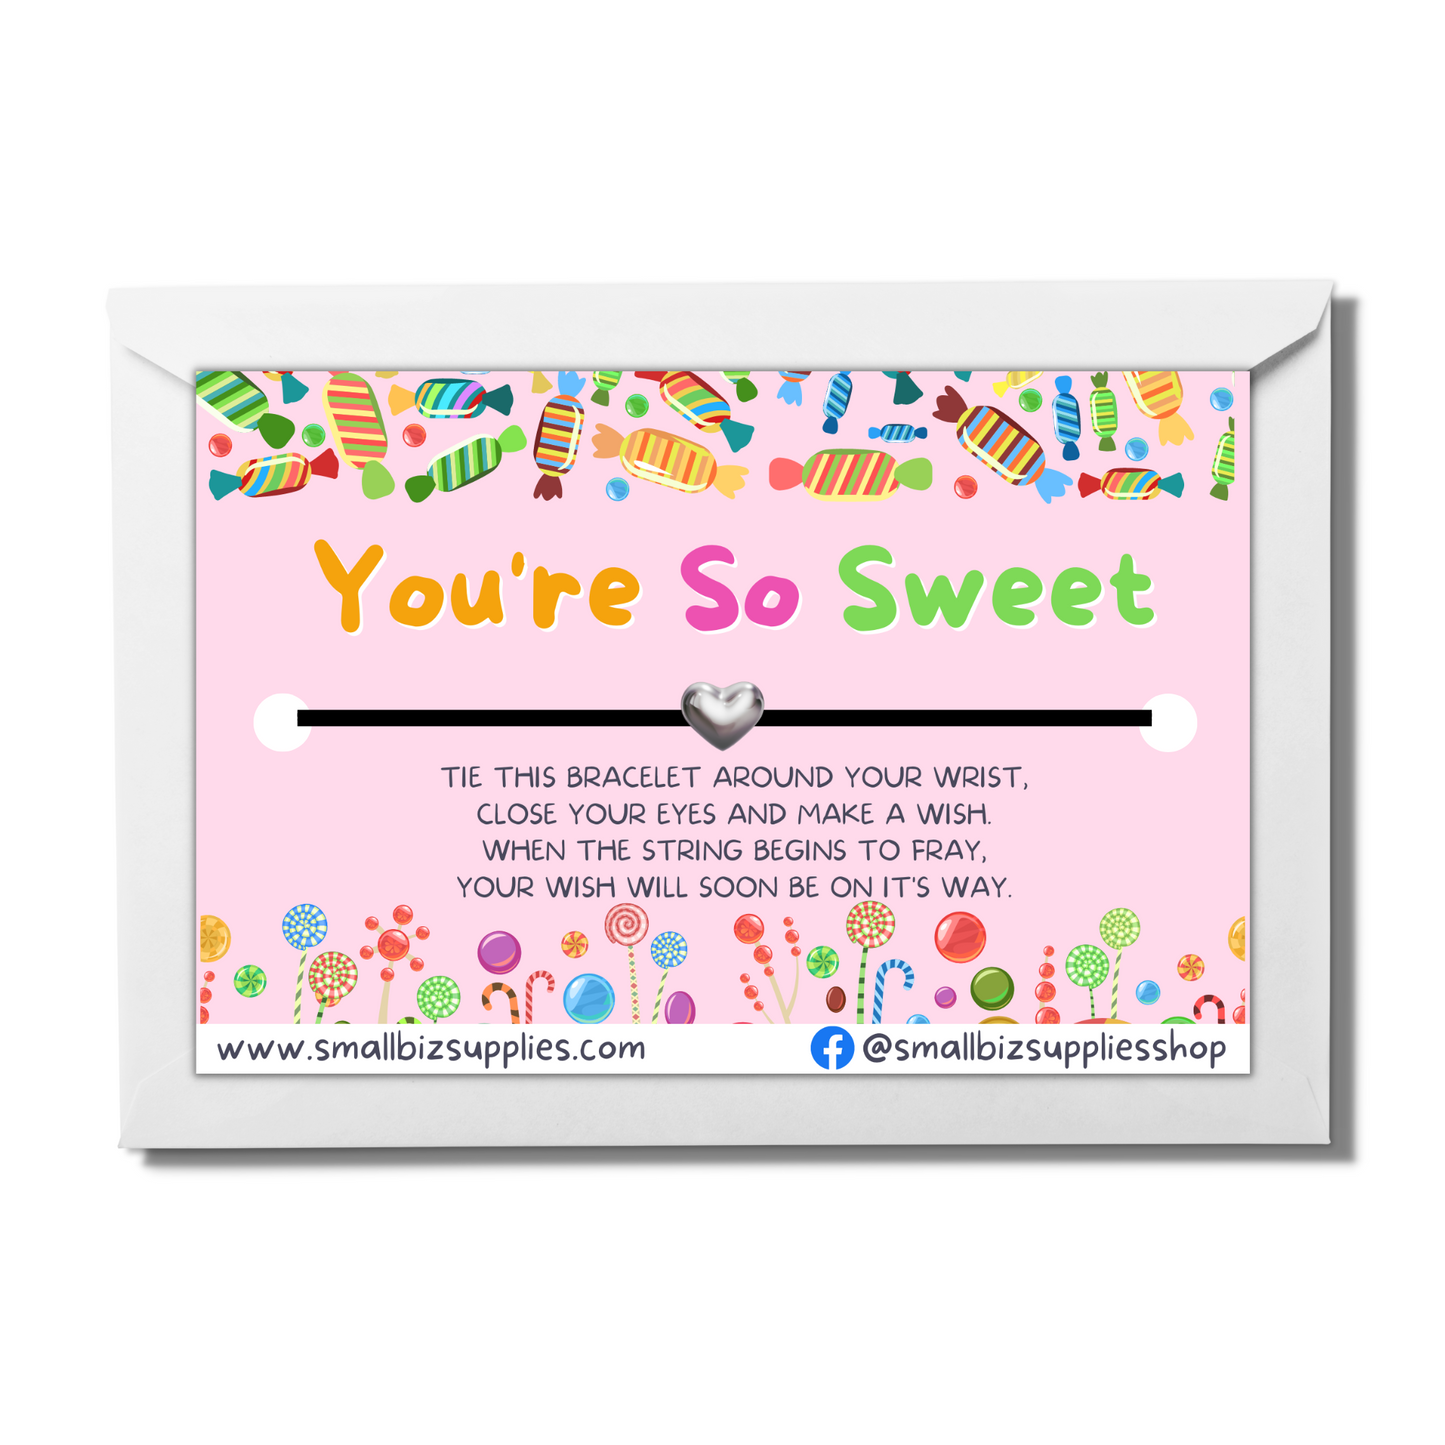 You're So Sweet Wish Bracelet With Envelope